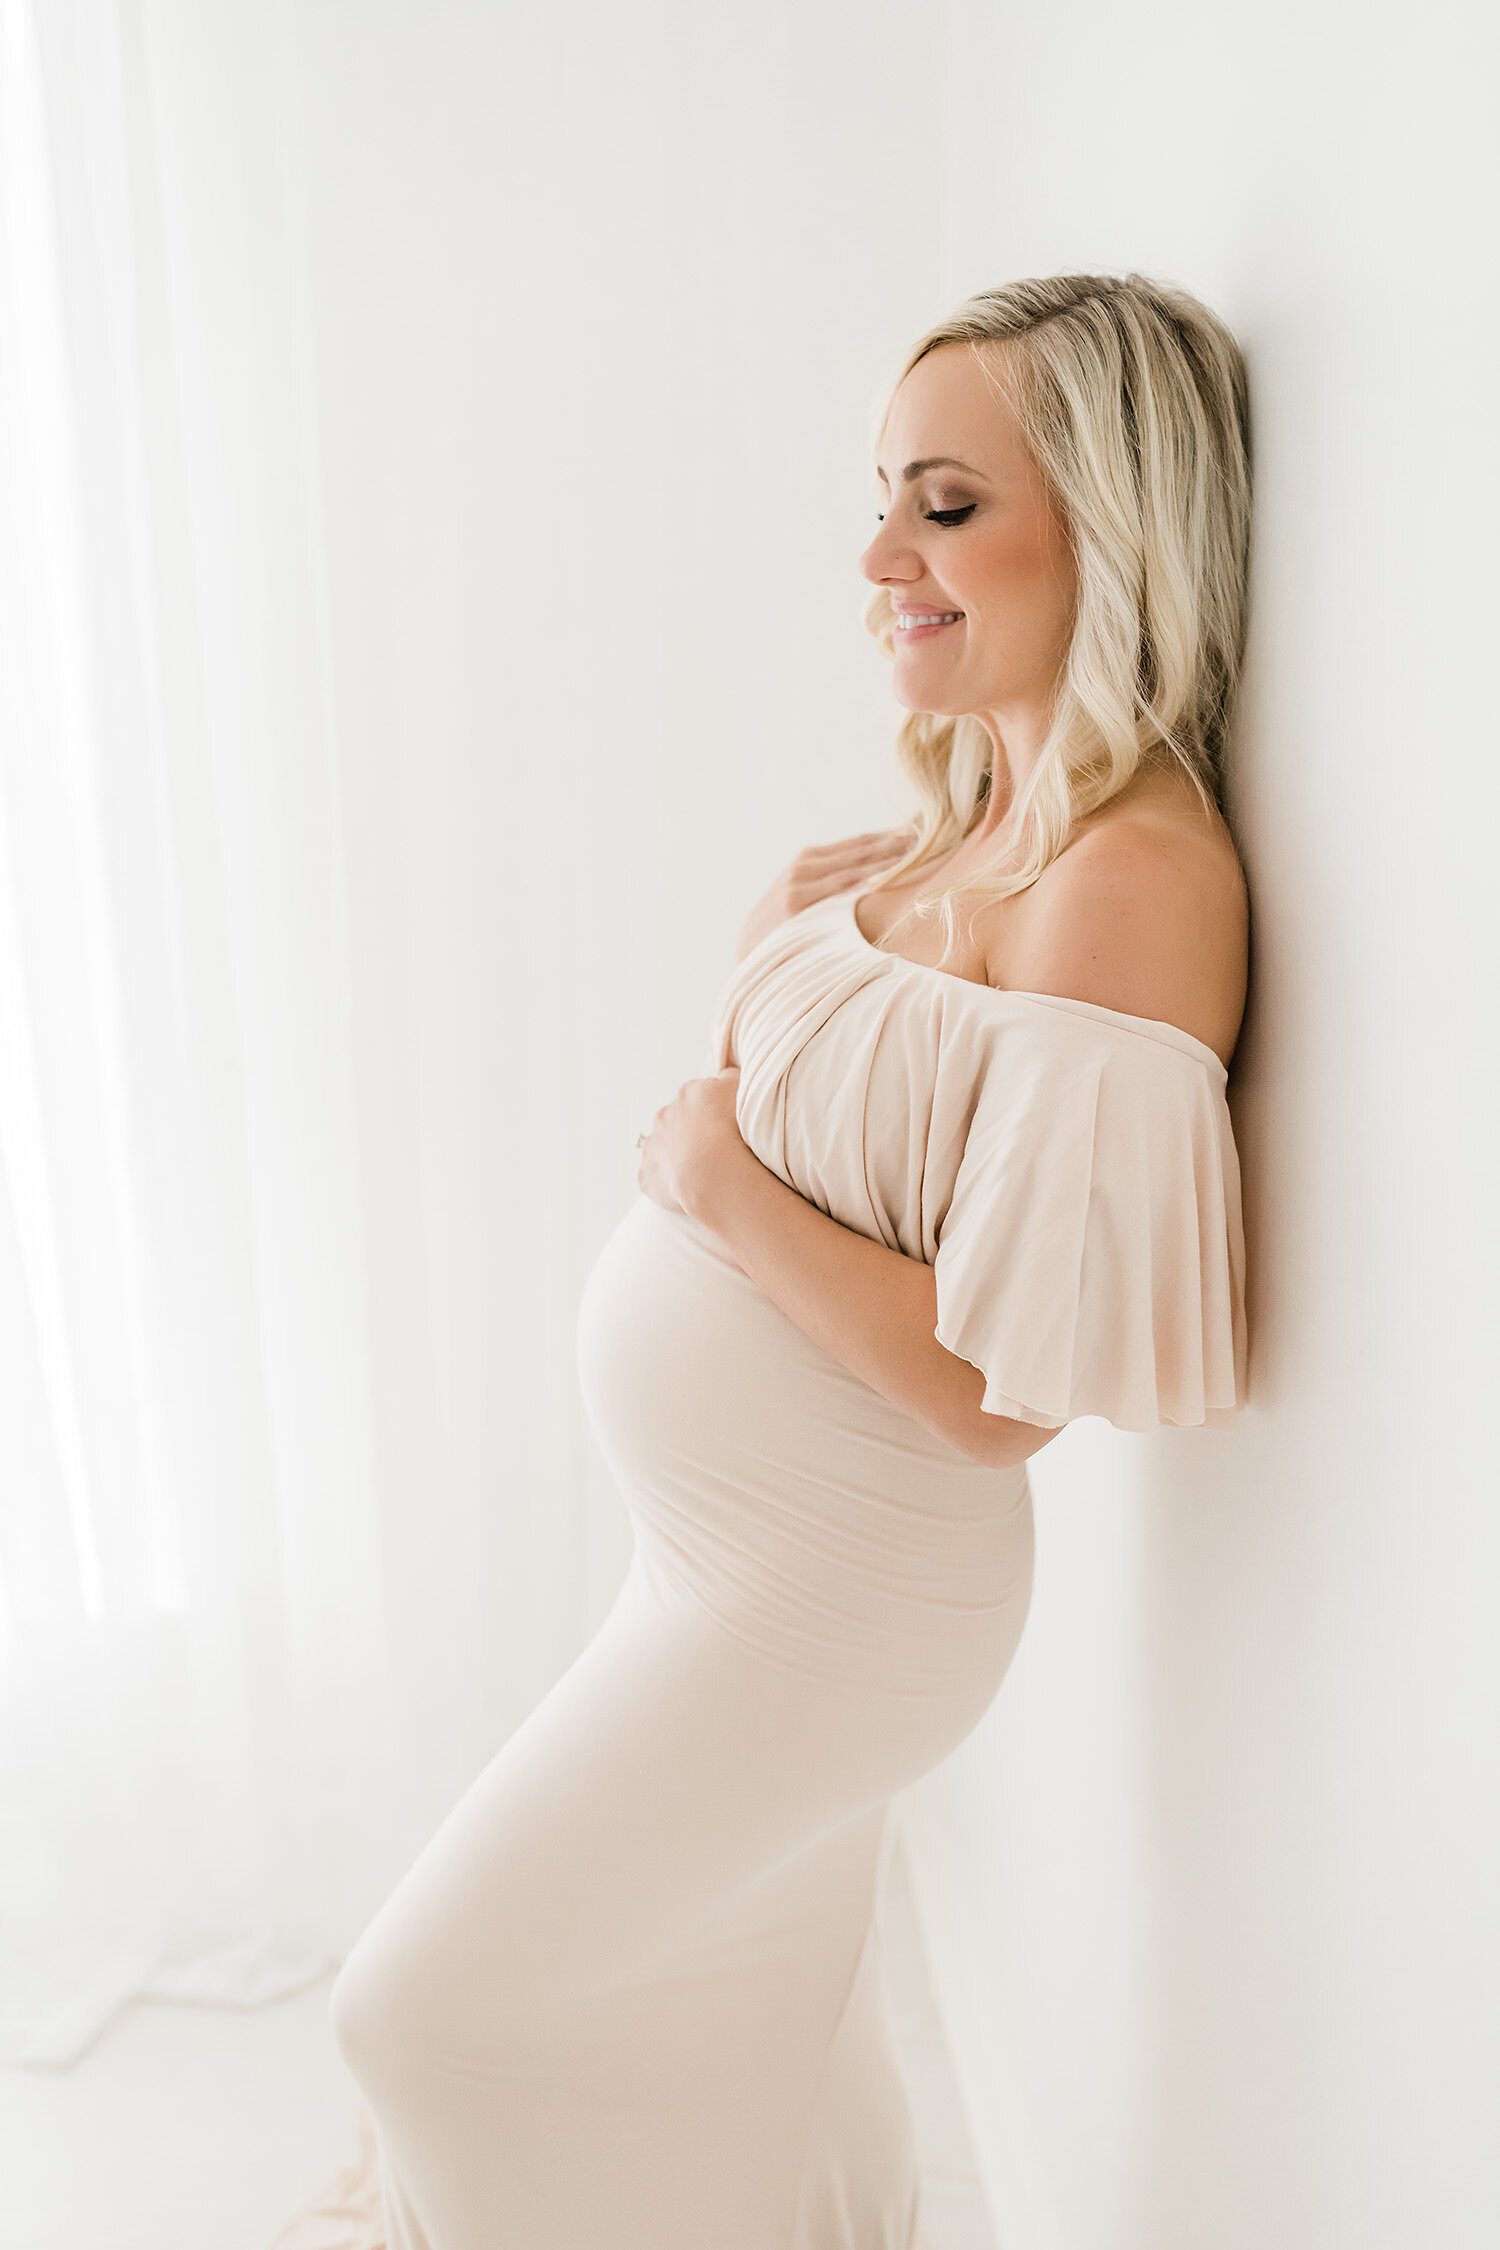 beautiful pregnant woman leaning against a wall